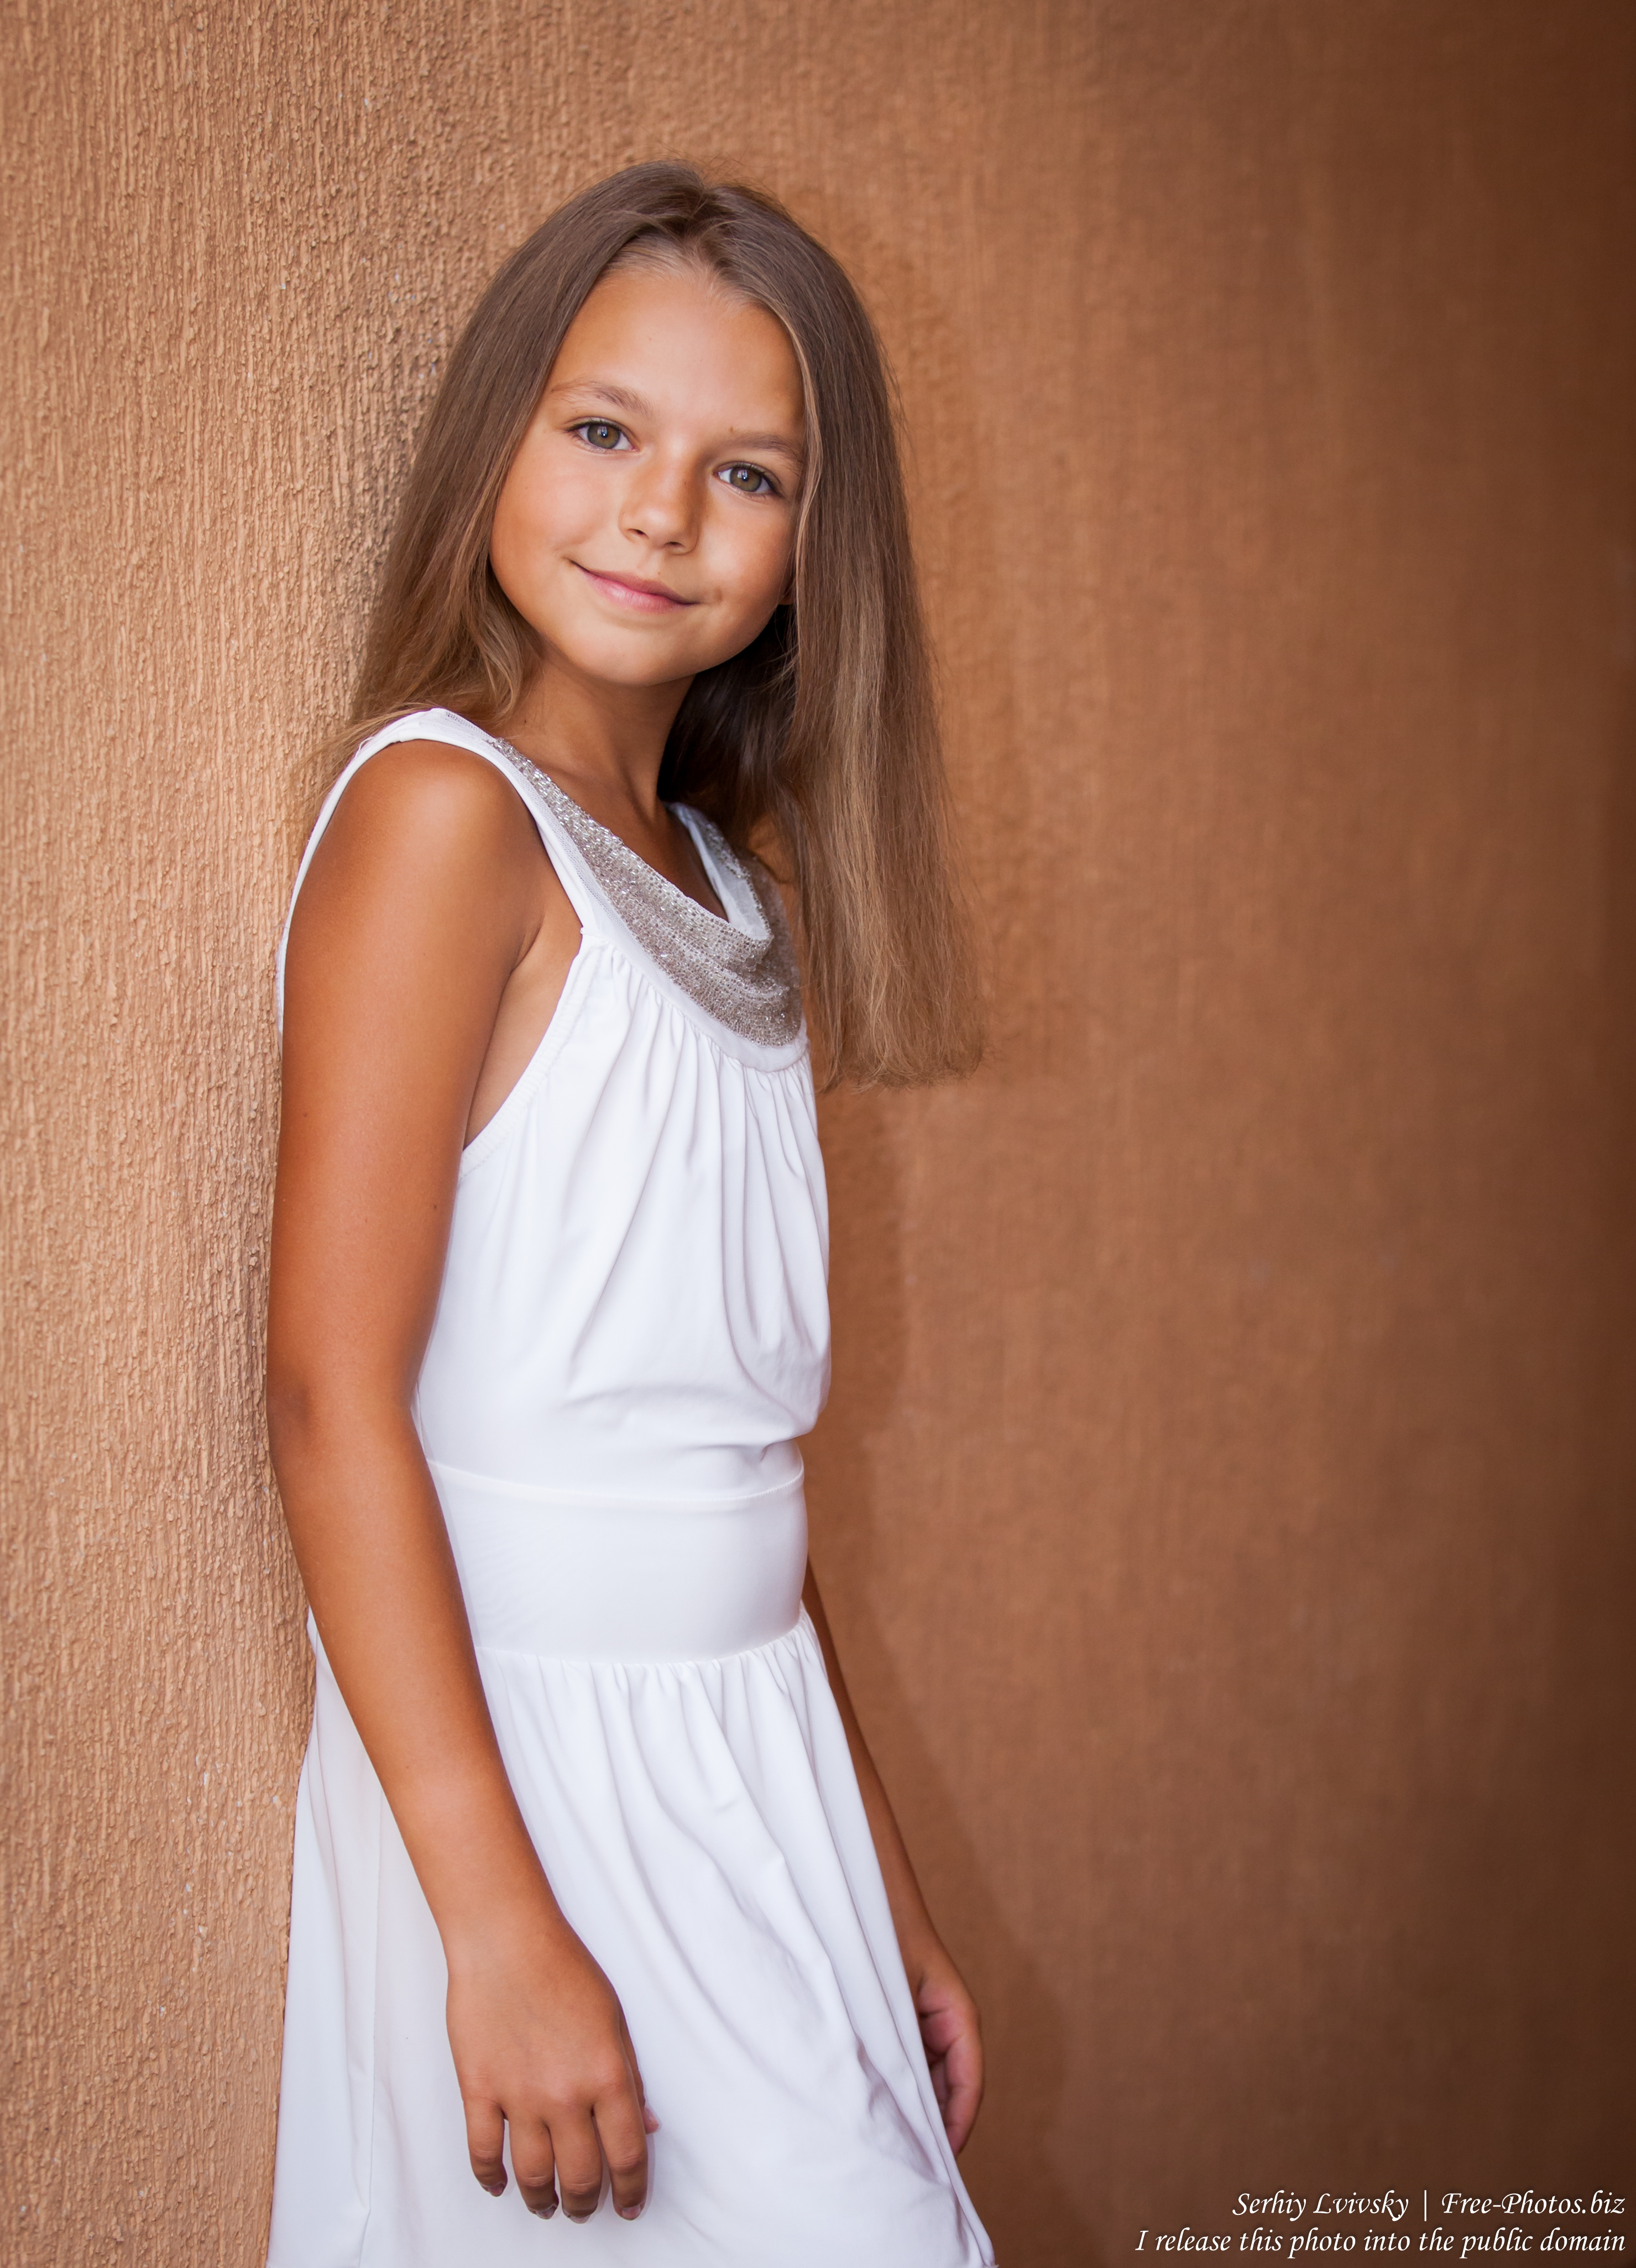 a twelve-year-old girl photographed in July 2015 by Serhiy Lvivsky, picture 6